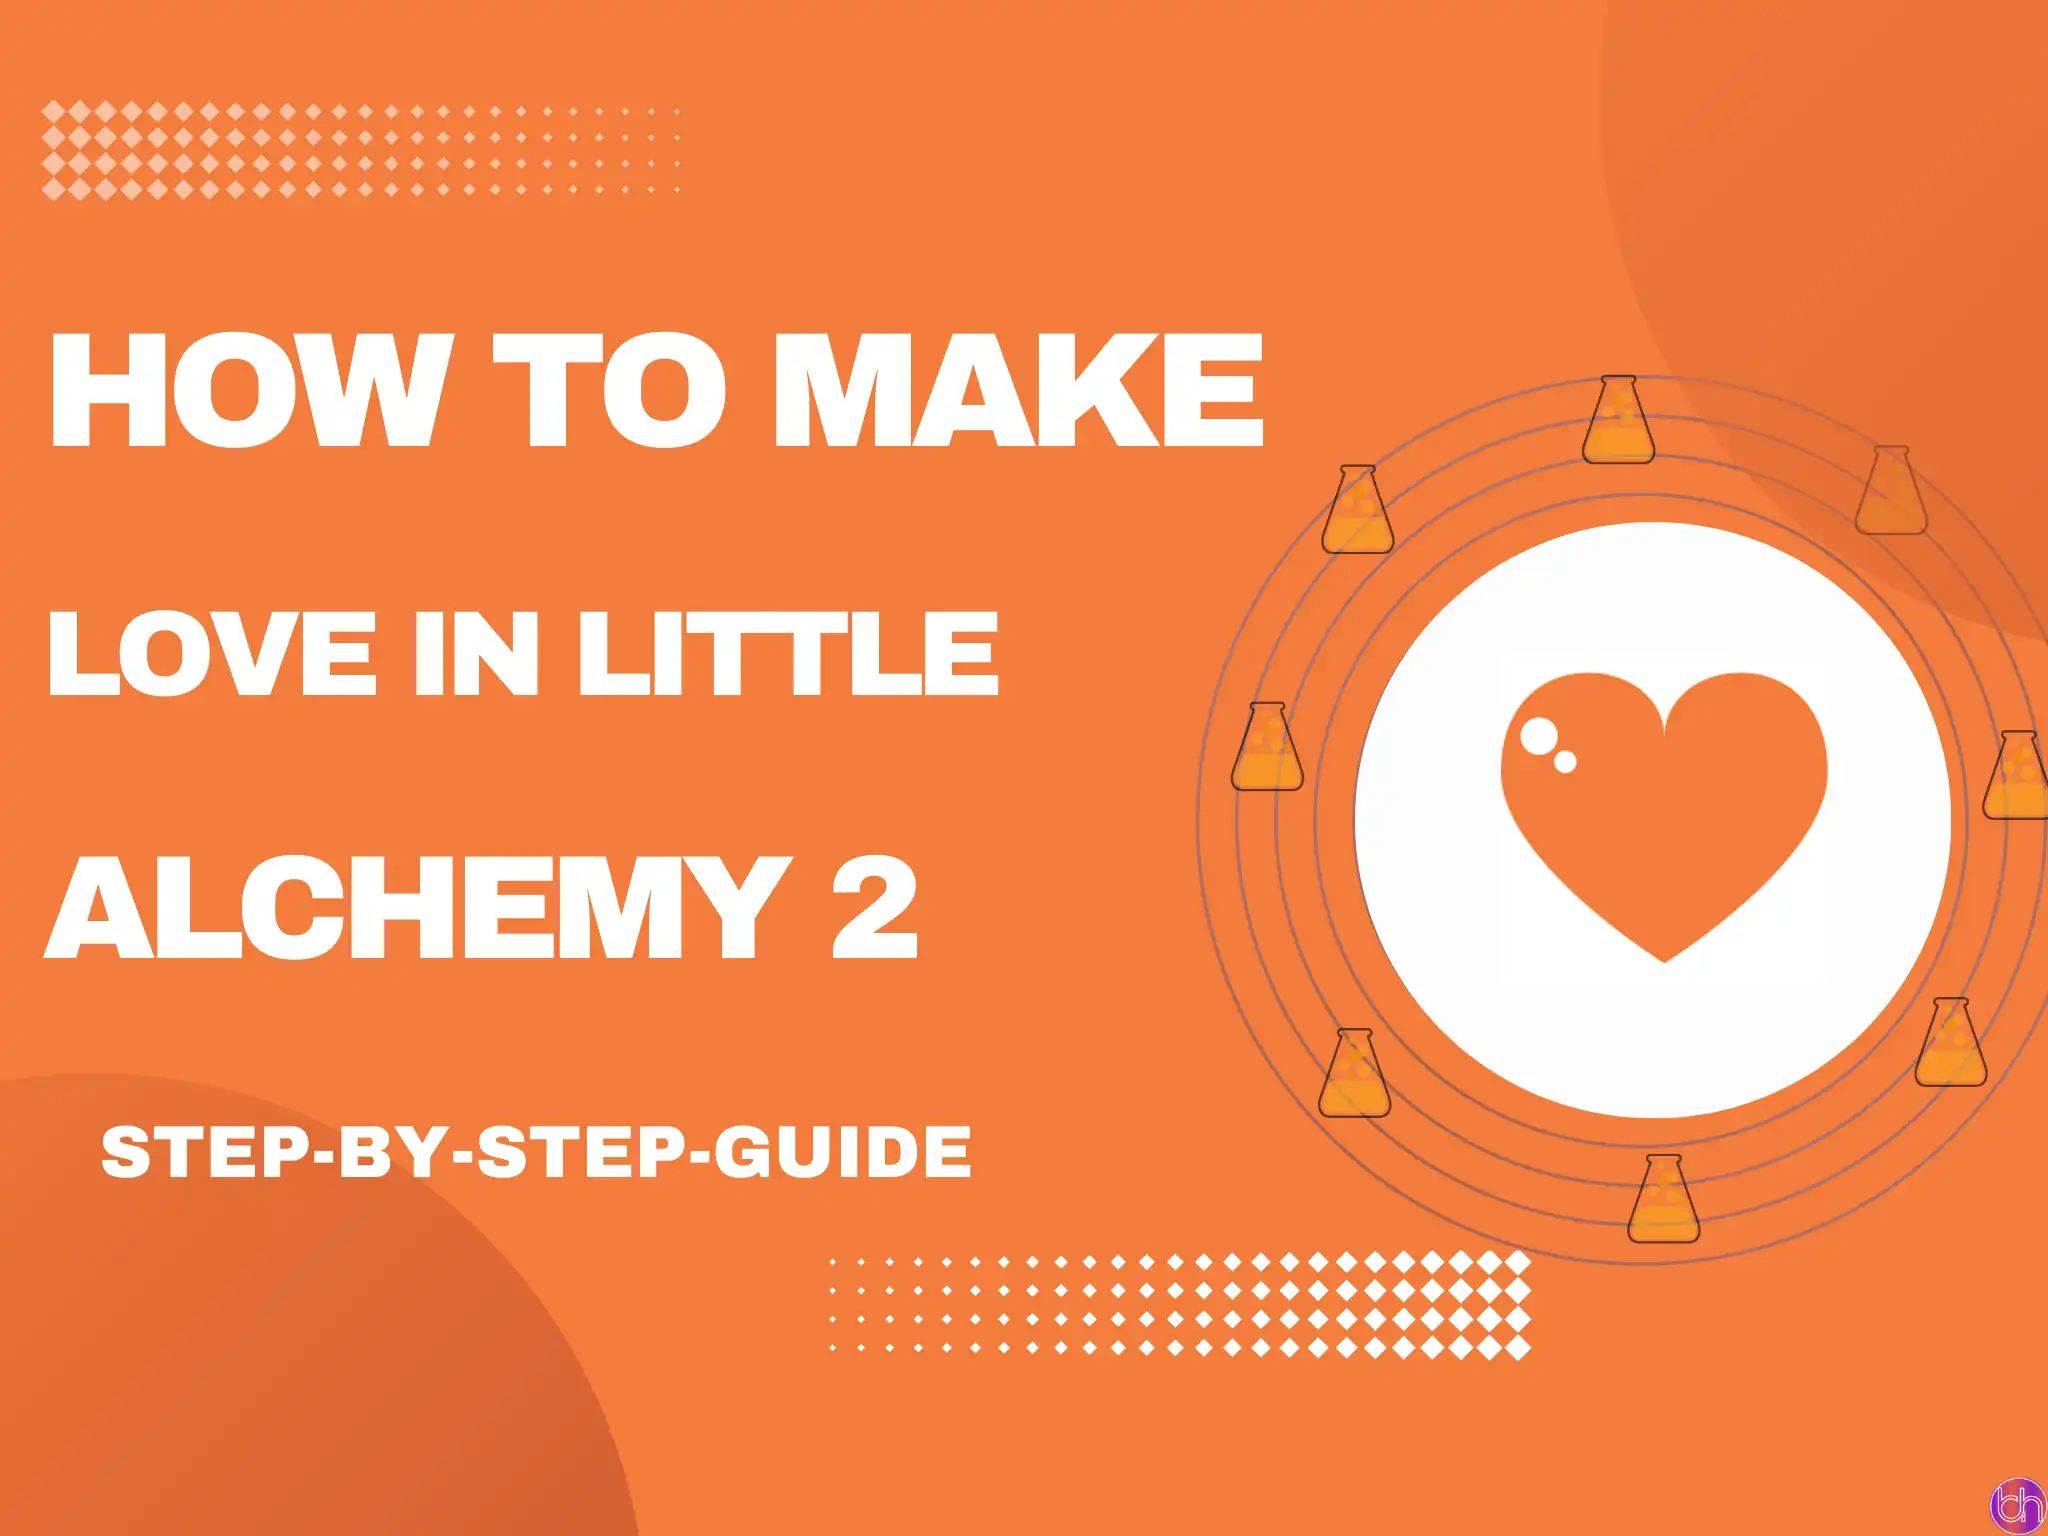 How to make Love in Little Alchemy 2